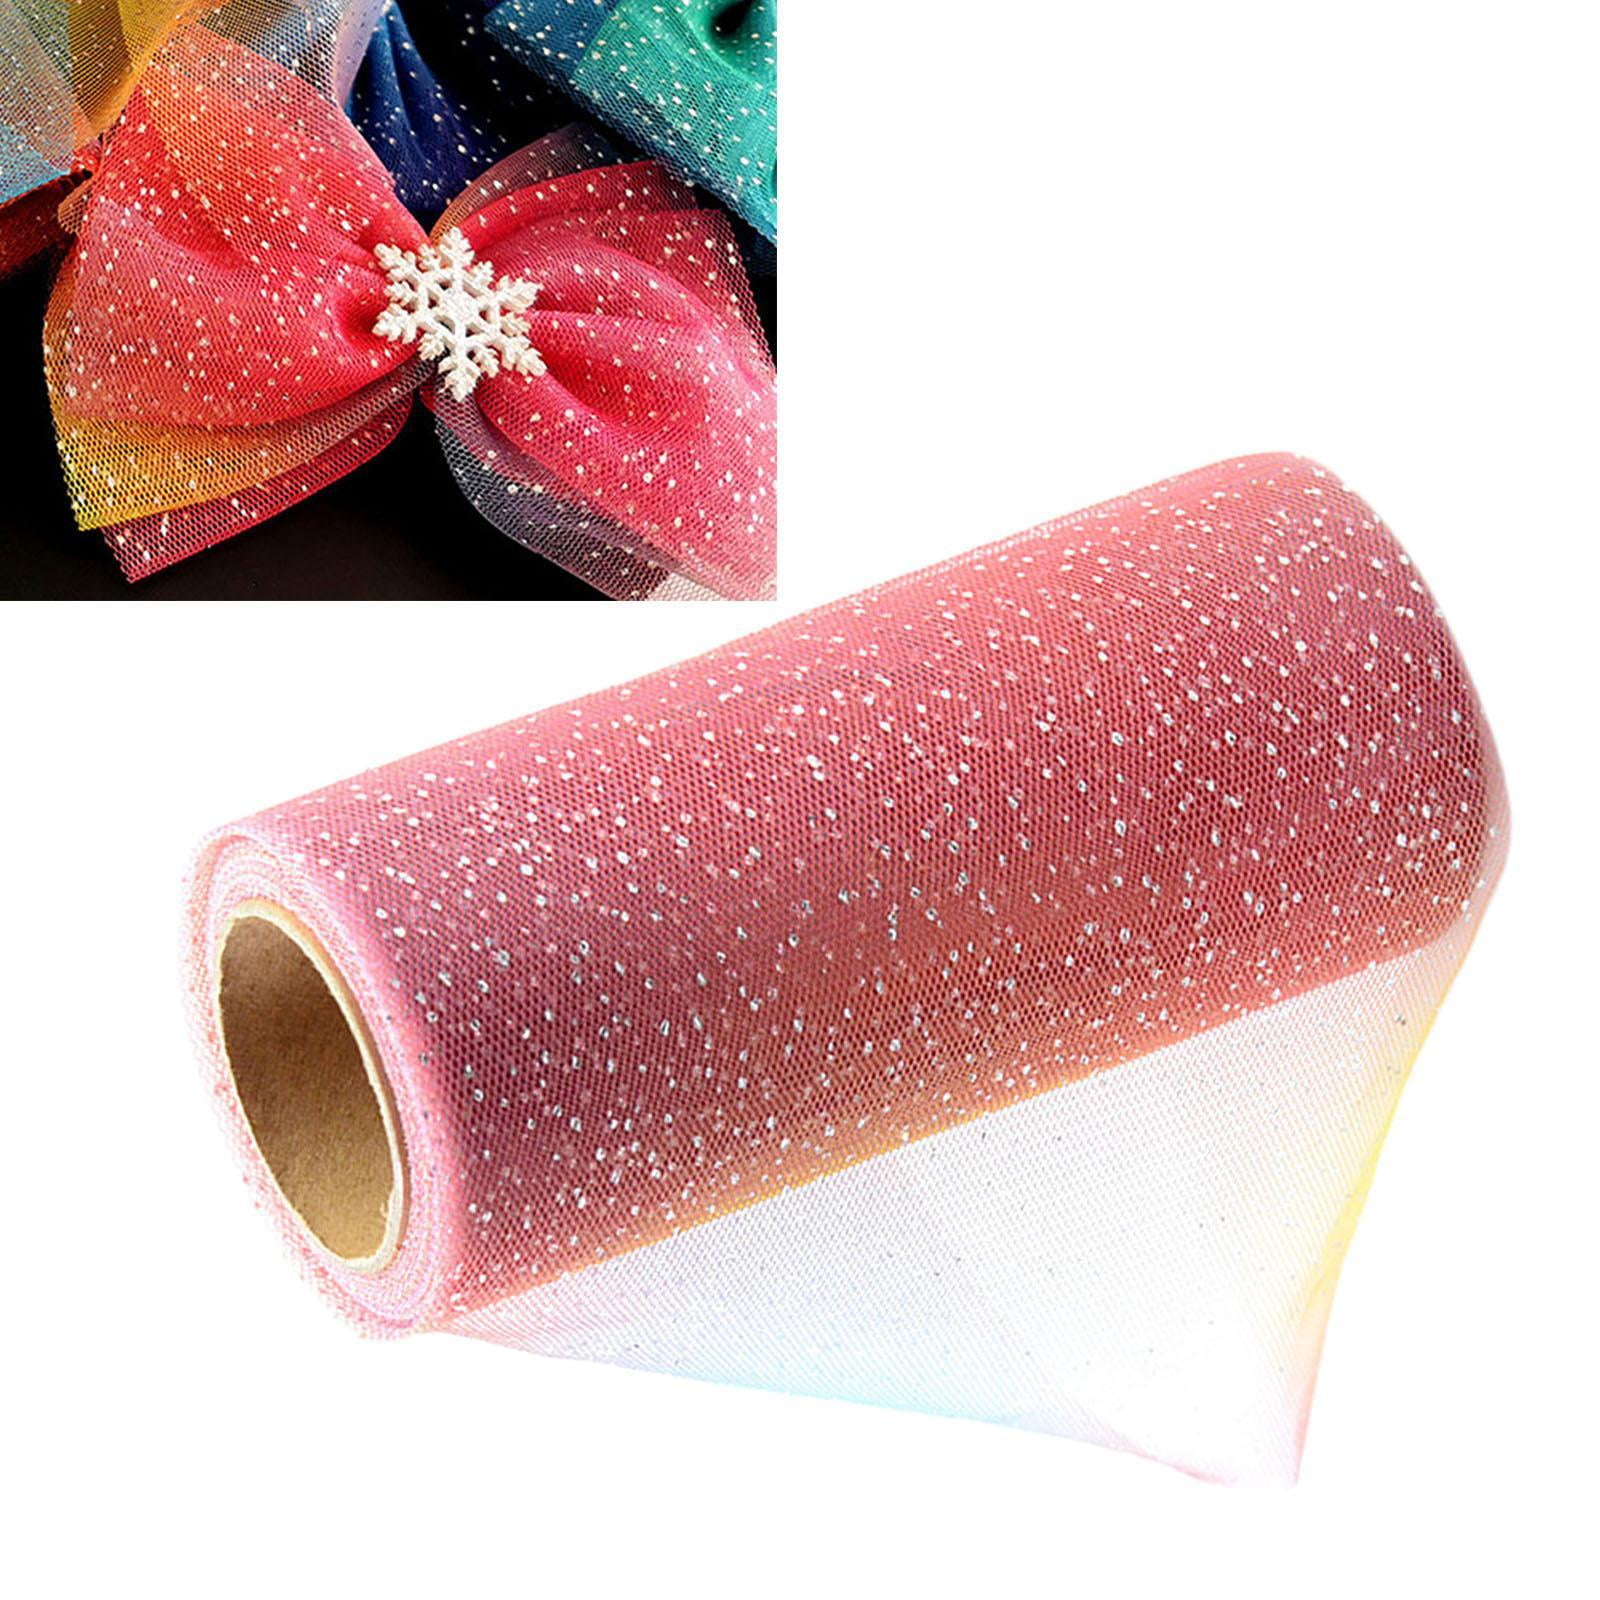 6 Inch x 11 Yard Rainbow Glitter Tulle Rolls, Sparkling Tulle Ribbon Tulle  Fabric Spool for Sash Bow Pet Skirt Sewing Crafting - Pink